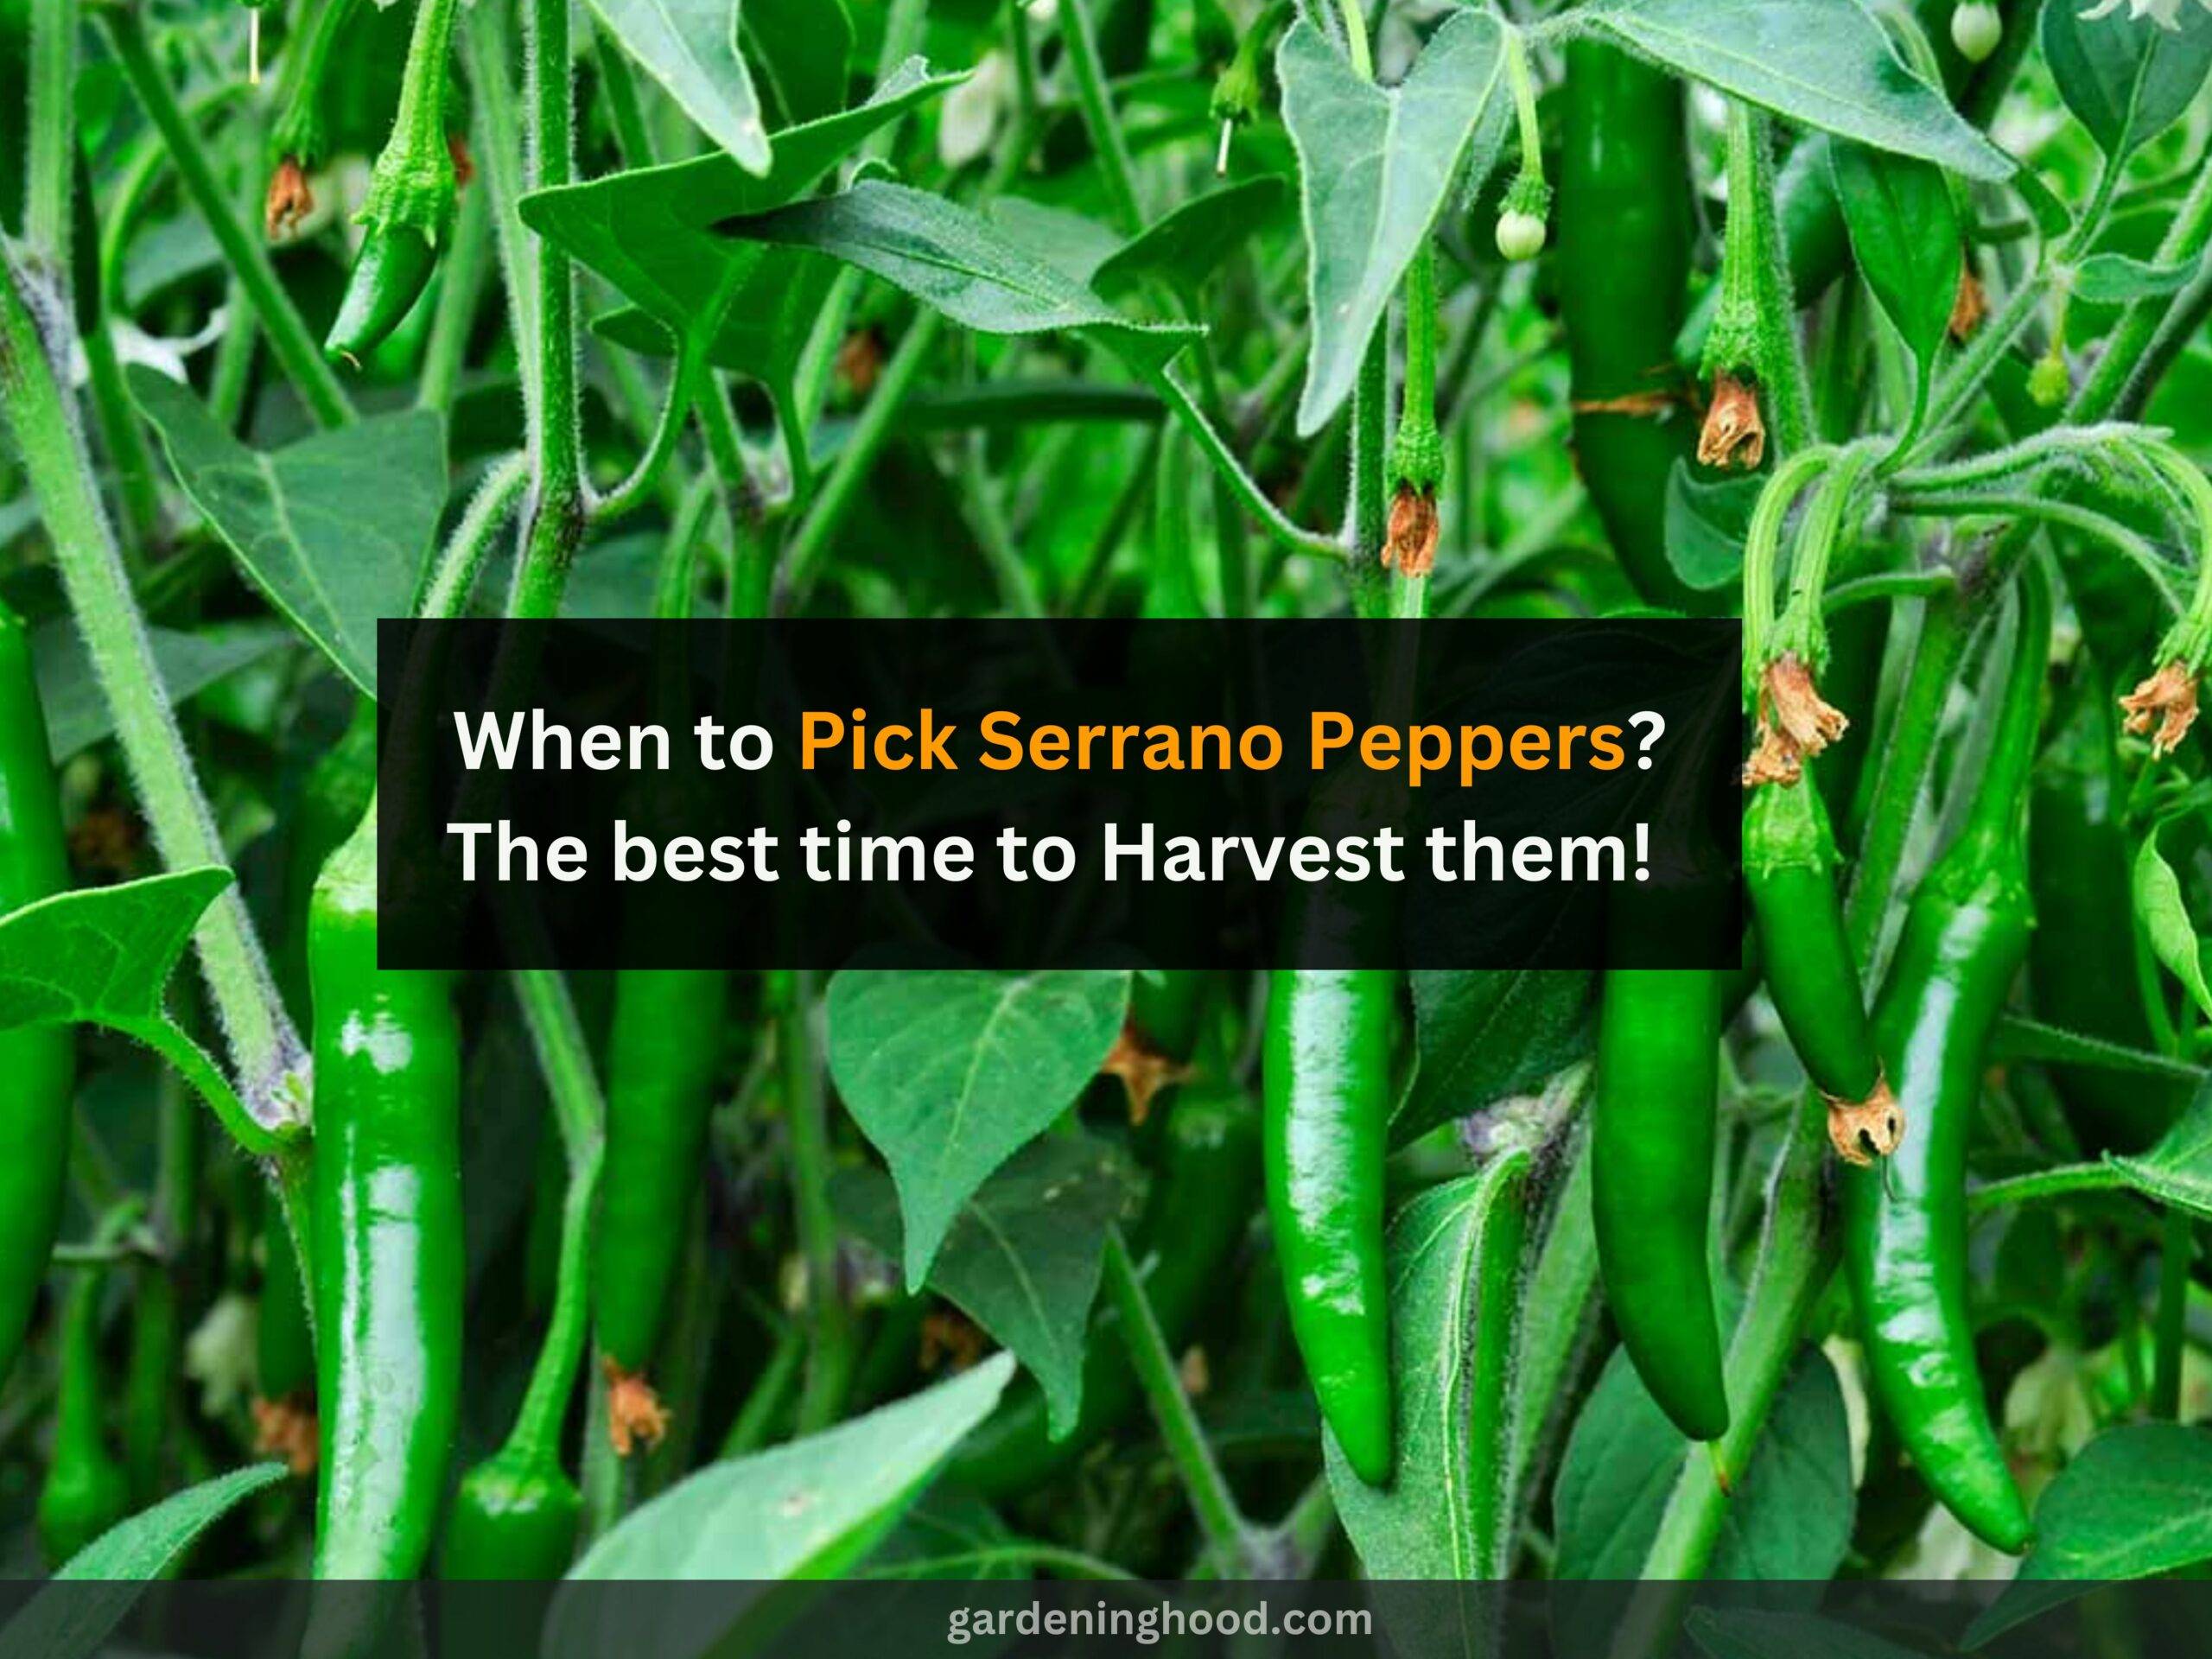 When to Pick Serrano Peppers? - The best time to Harvest them! 